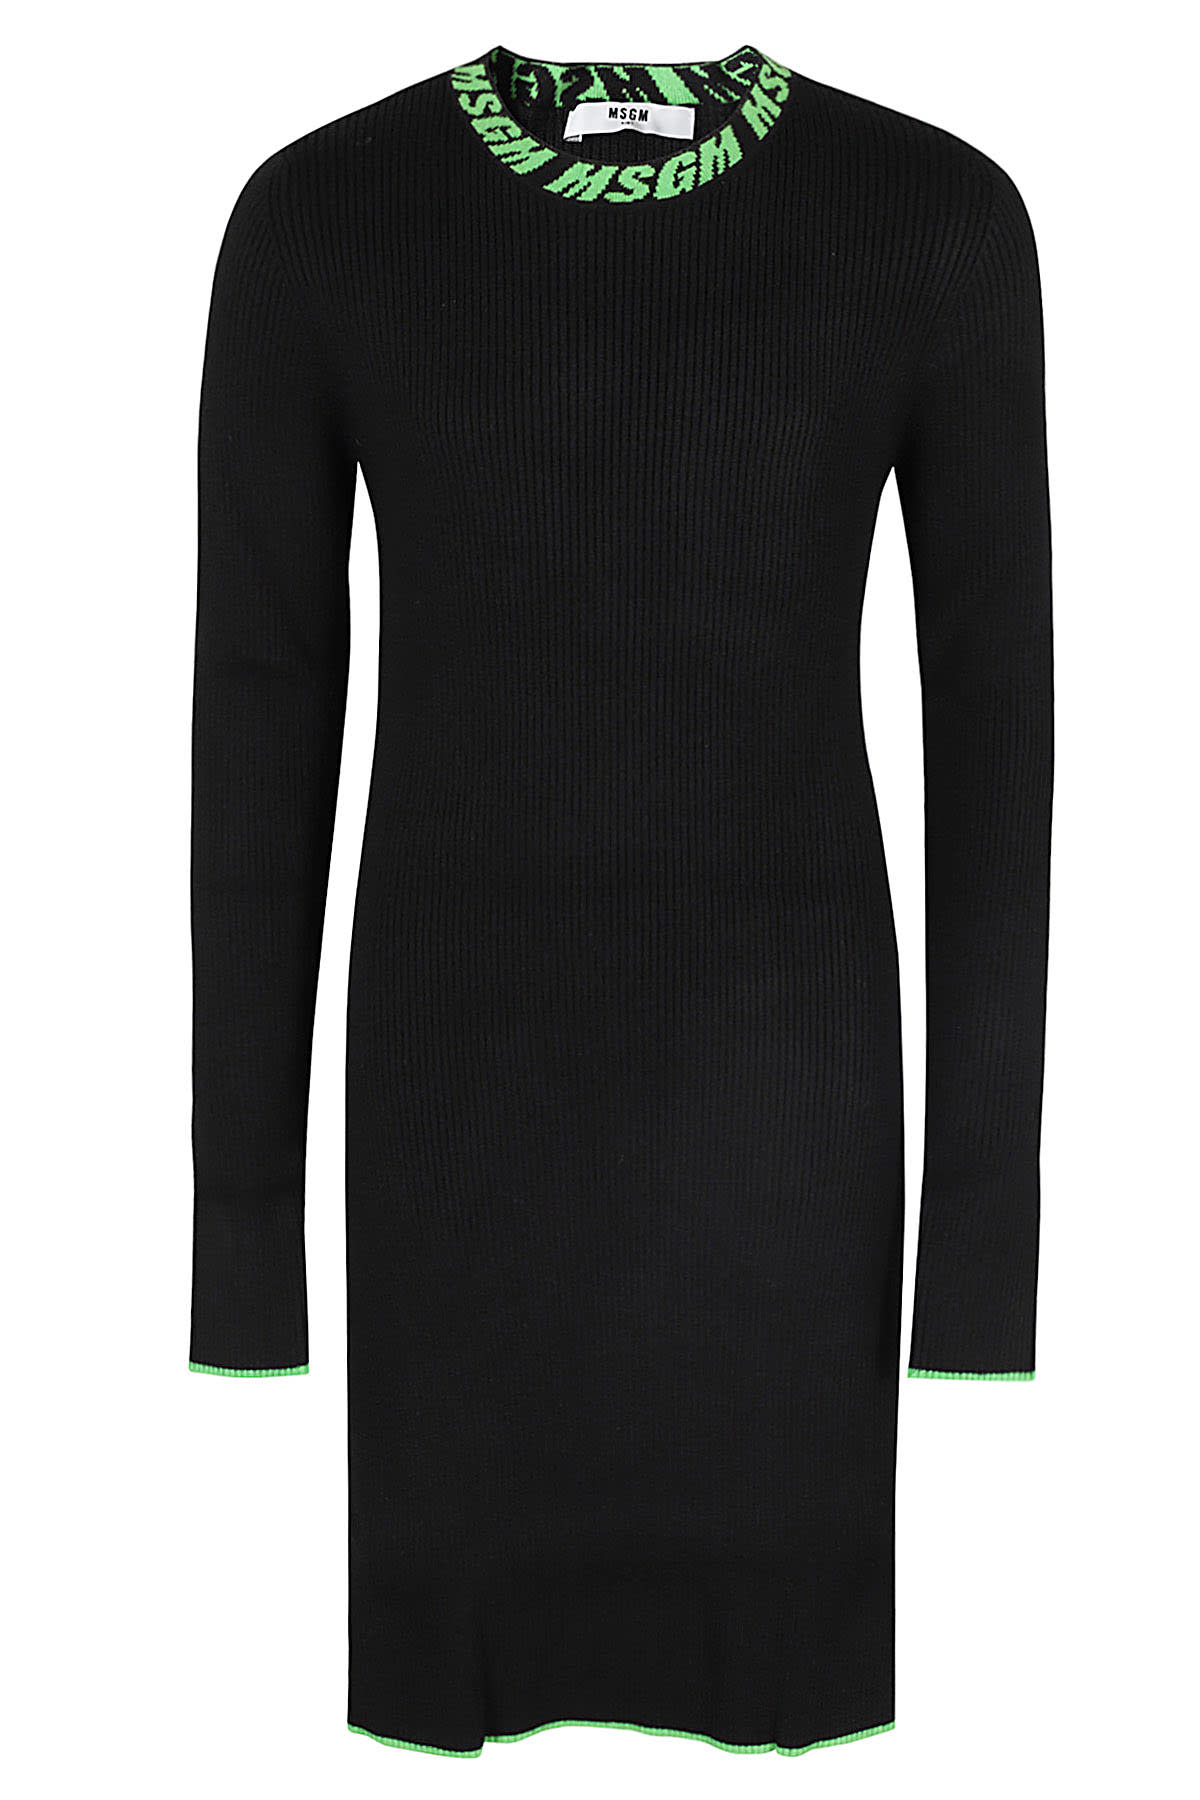 Msgm Kids' Knitted Dress In Black